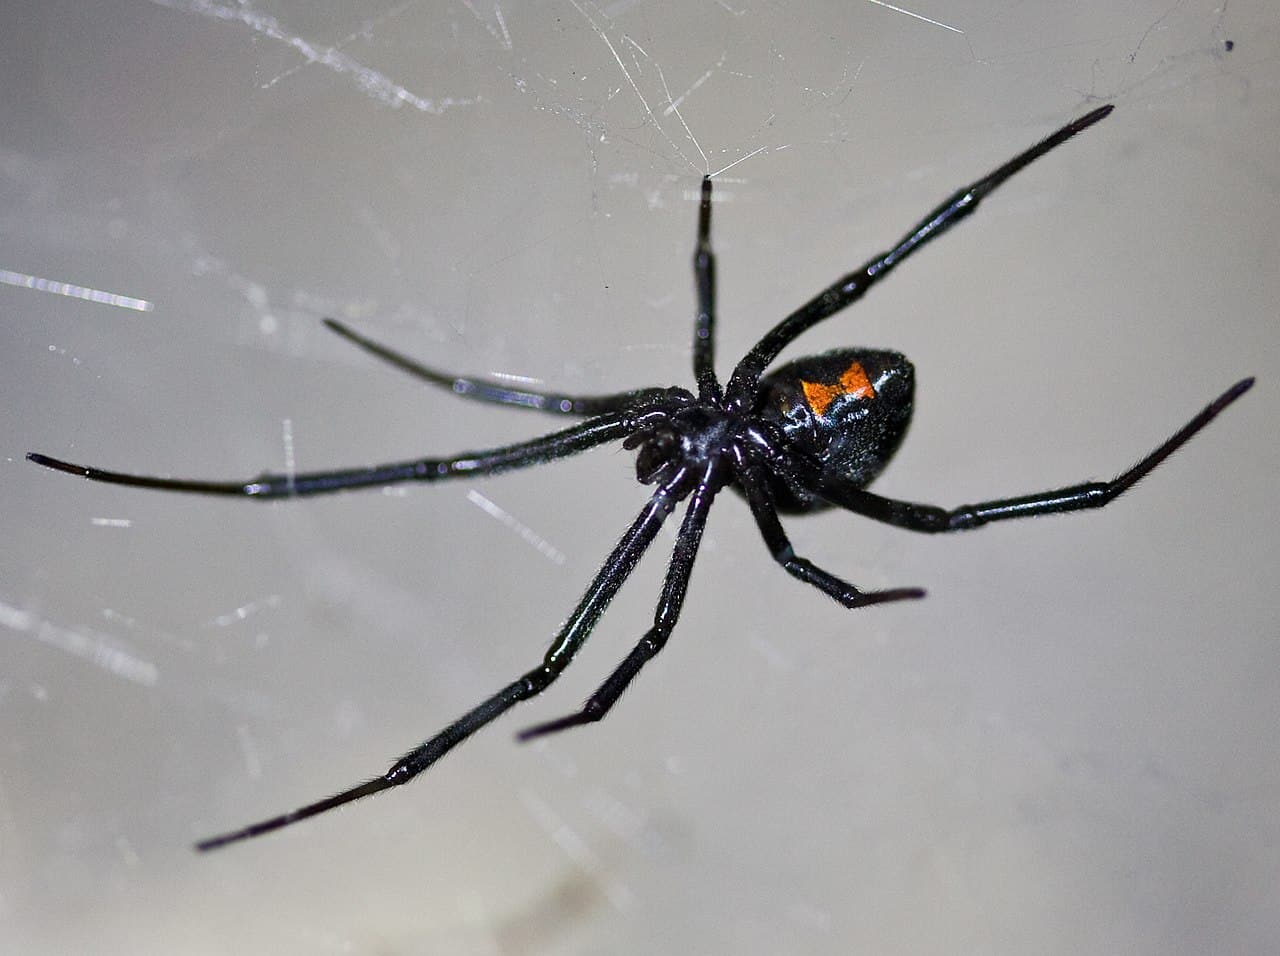 Eight Fun Facts About Black Widows, Science